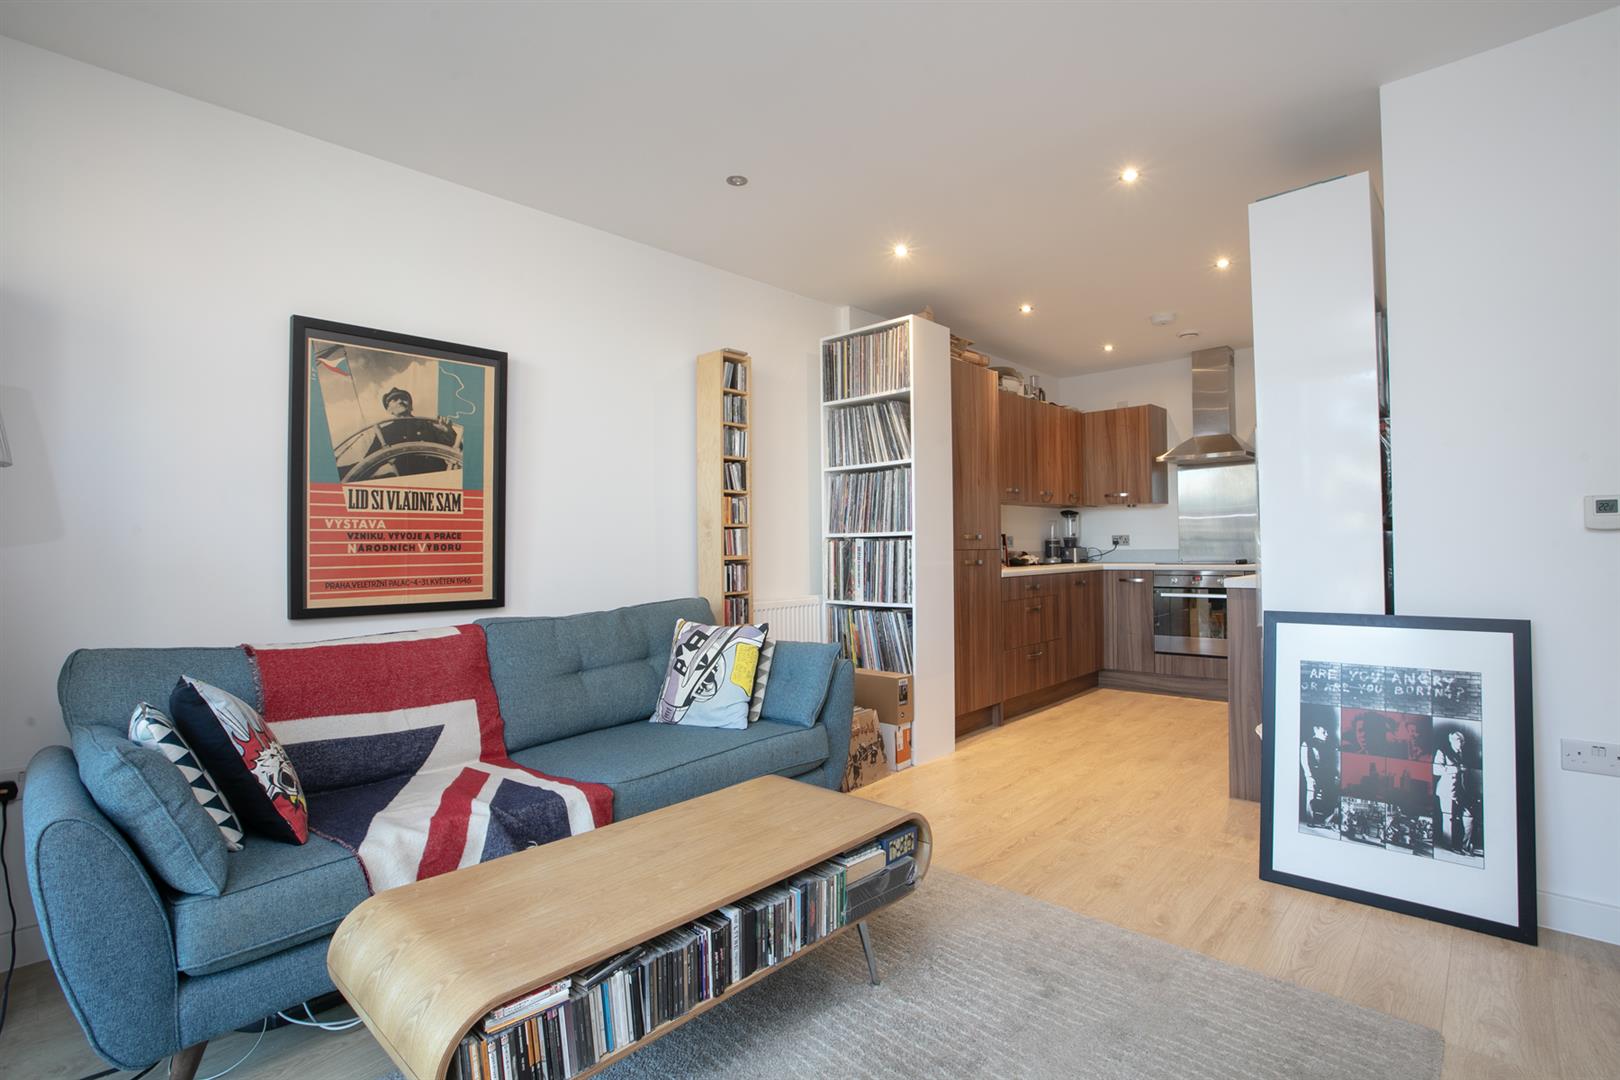 Flat/Apartment For Sale in Edmund Street, Camberwell, SE5 1176 view4